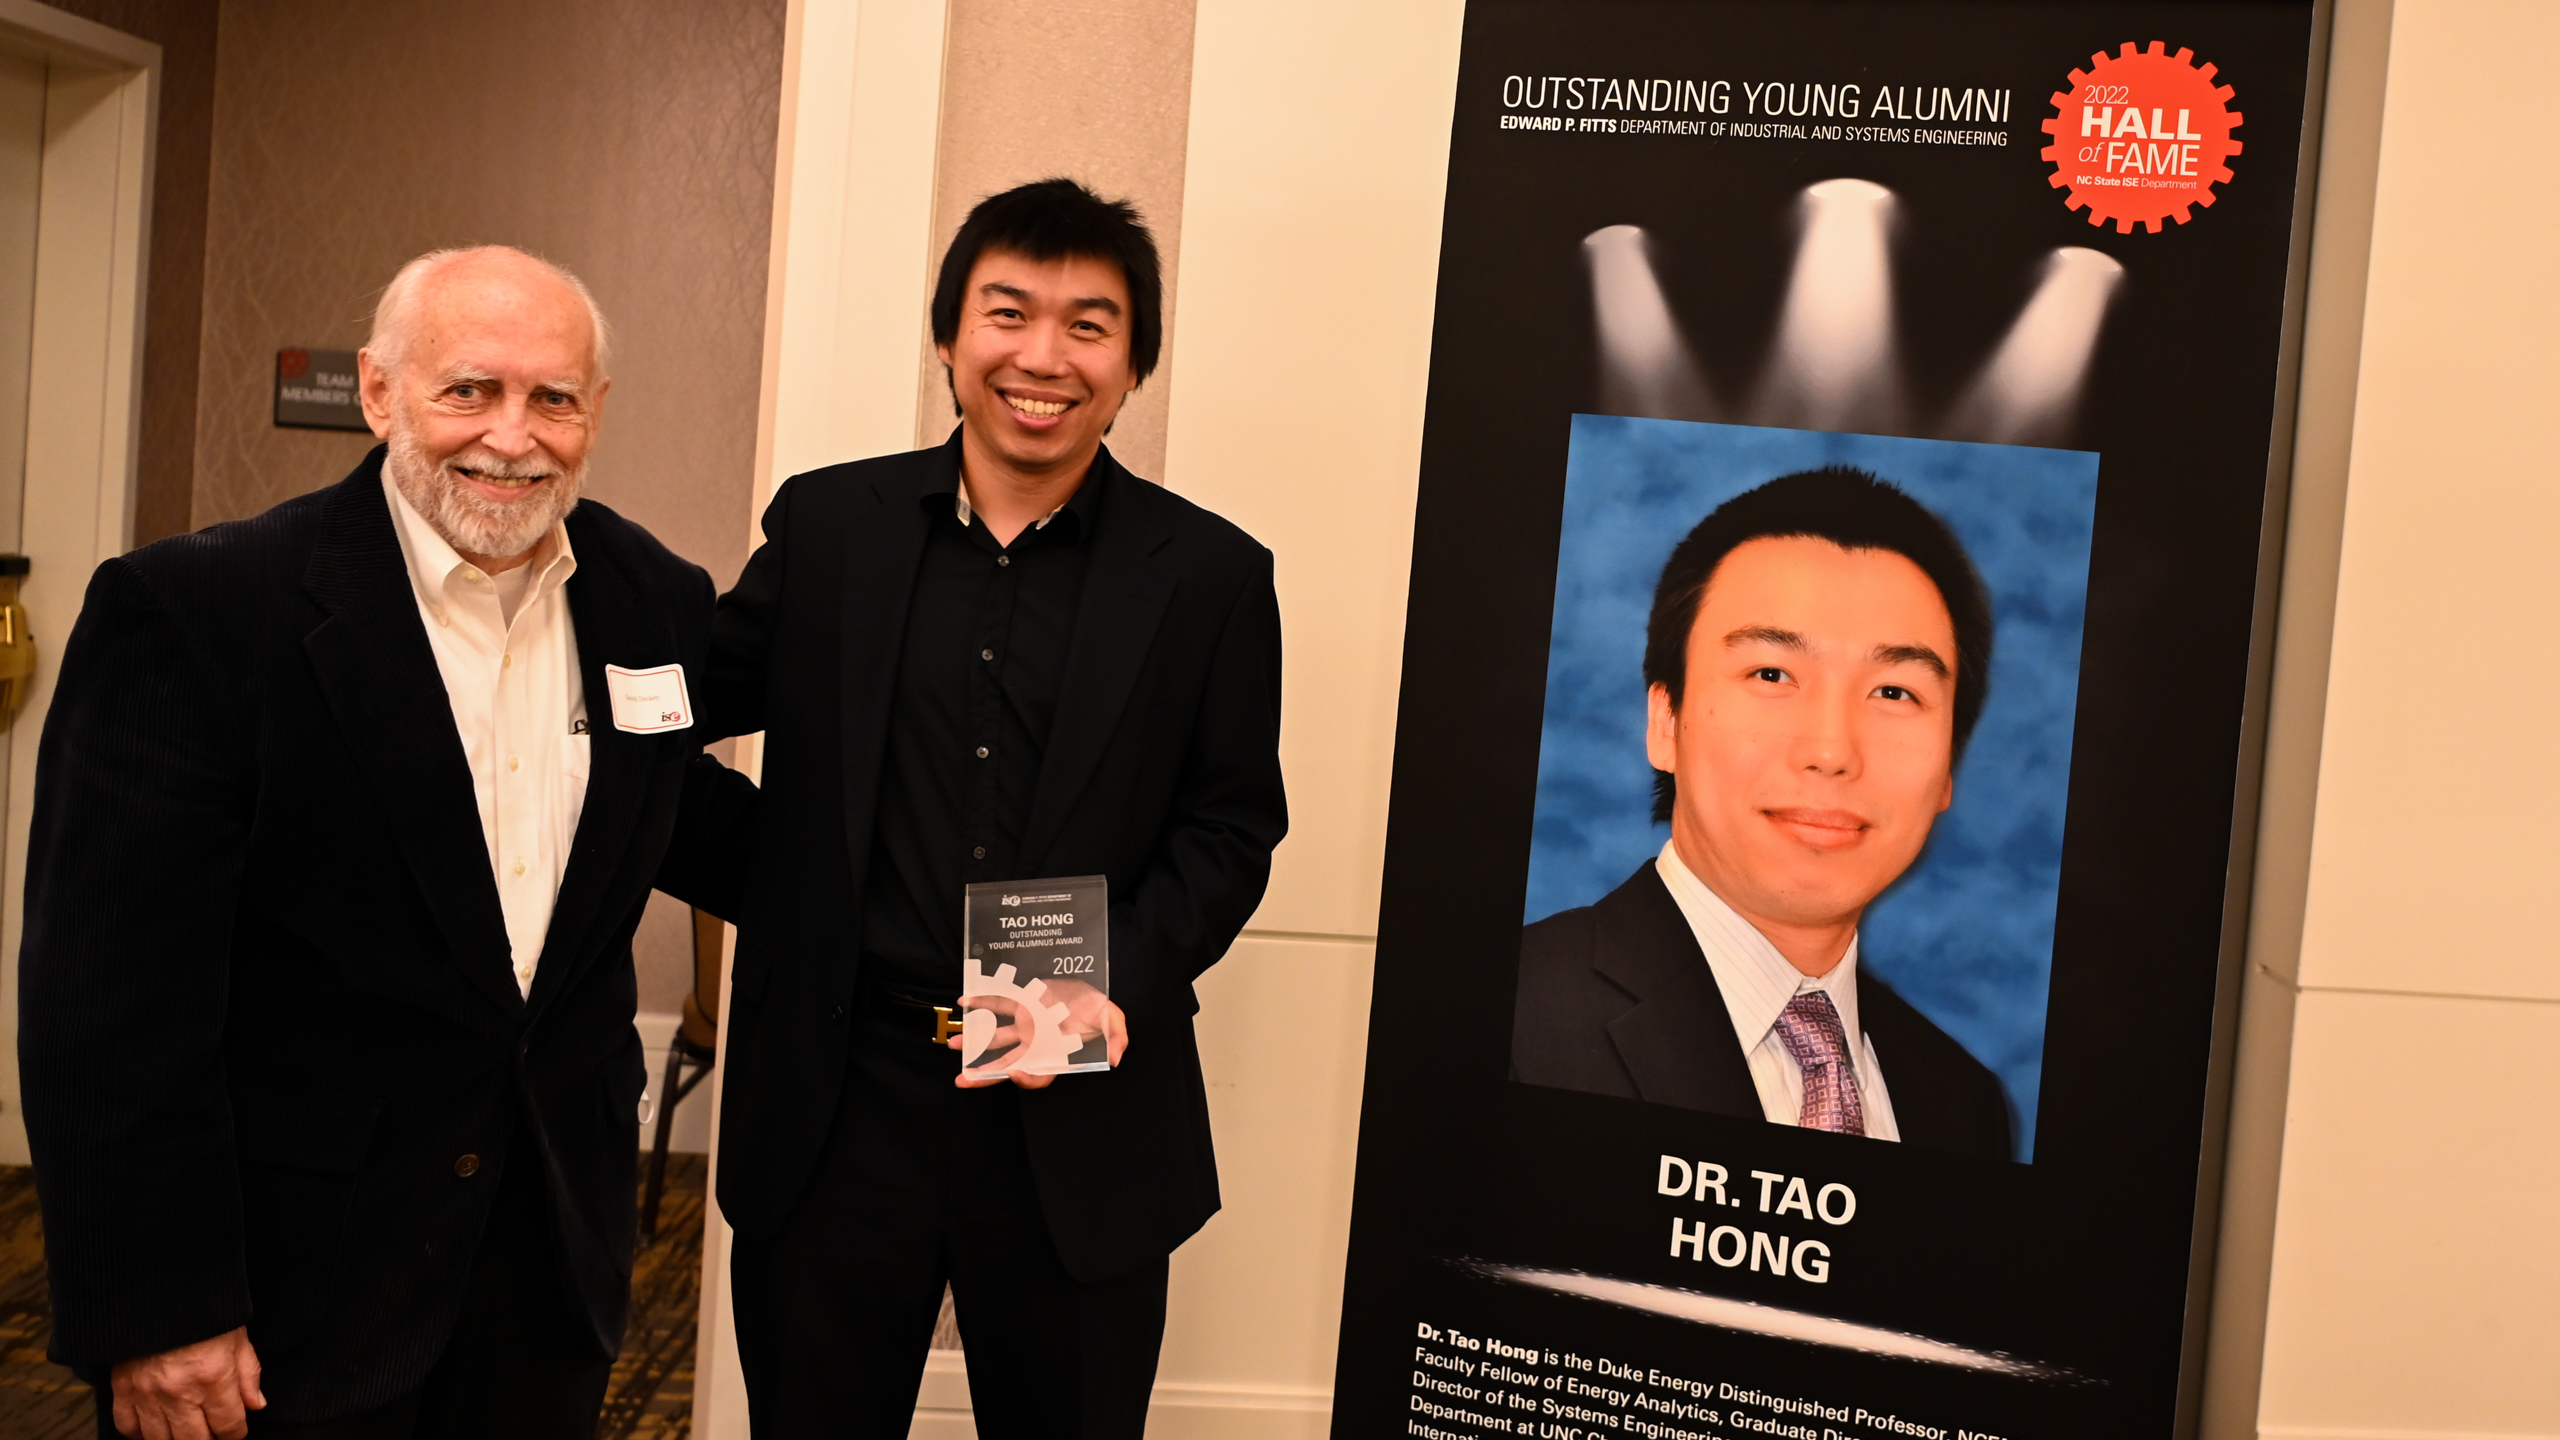 Dr. Tao Hong and one of his professors posing in front of his Outstanding Young Alumni banner